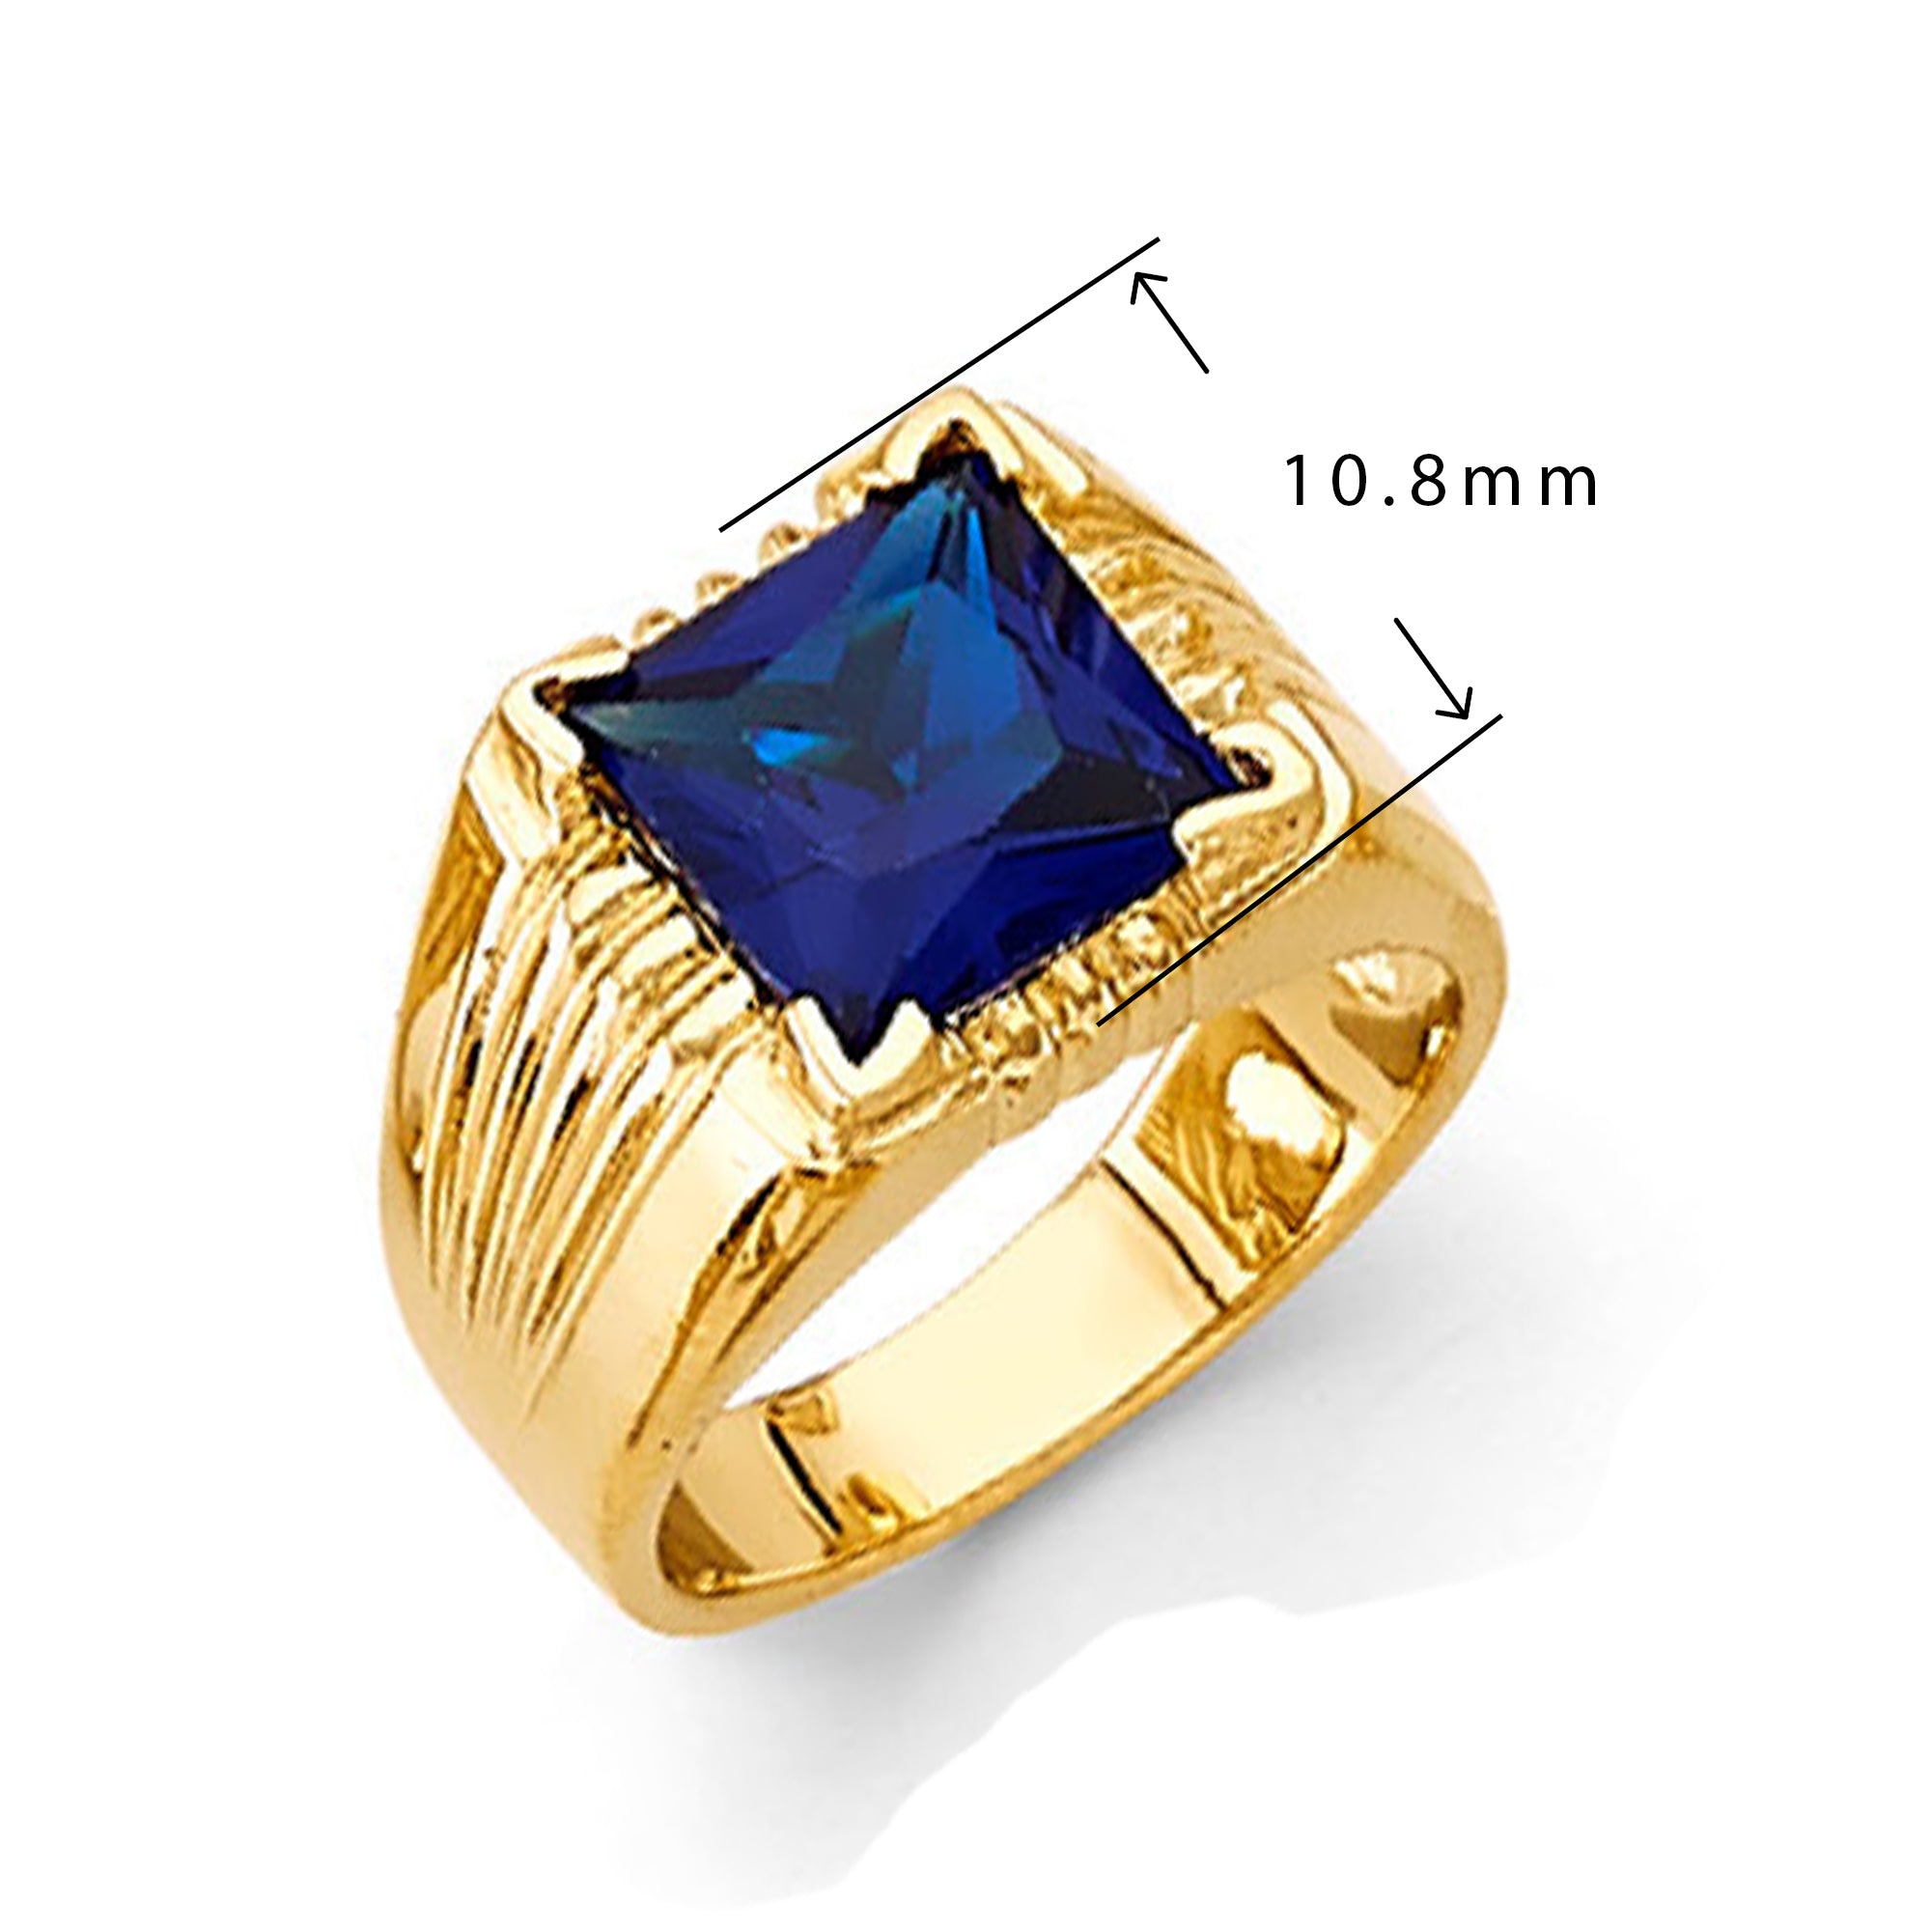 Radiant Rectangular Sapphire Ring in Solid Gold with Measurement